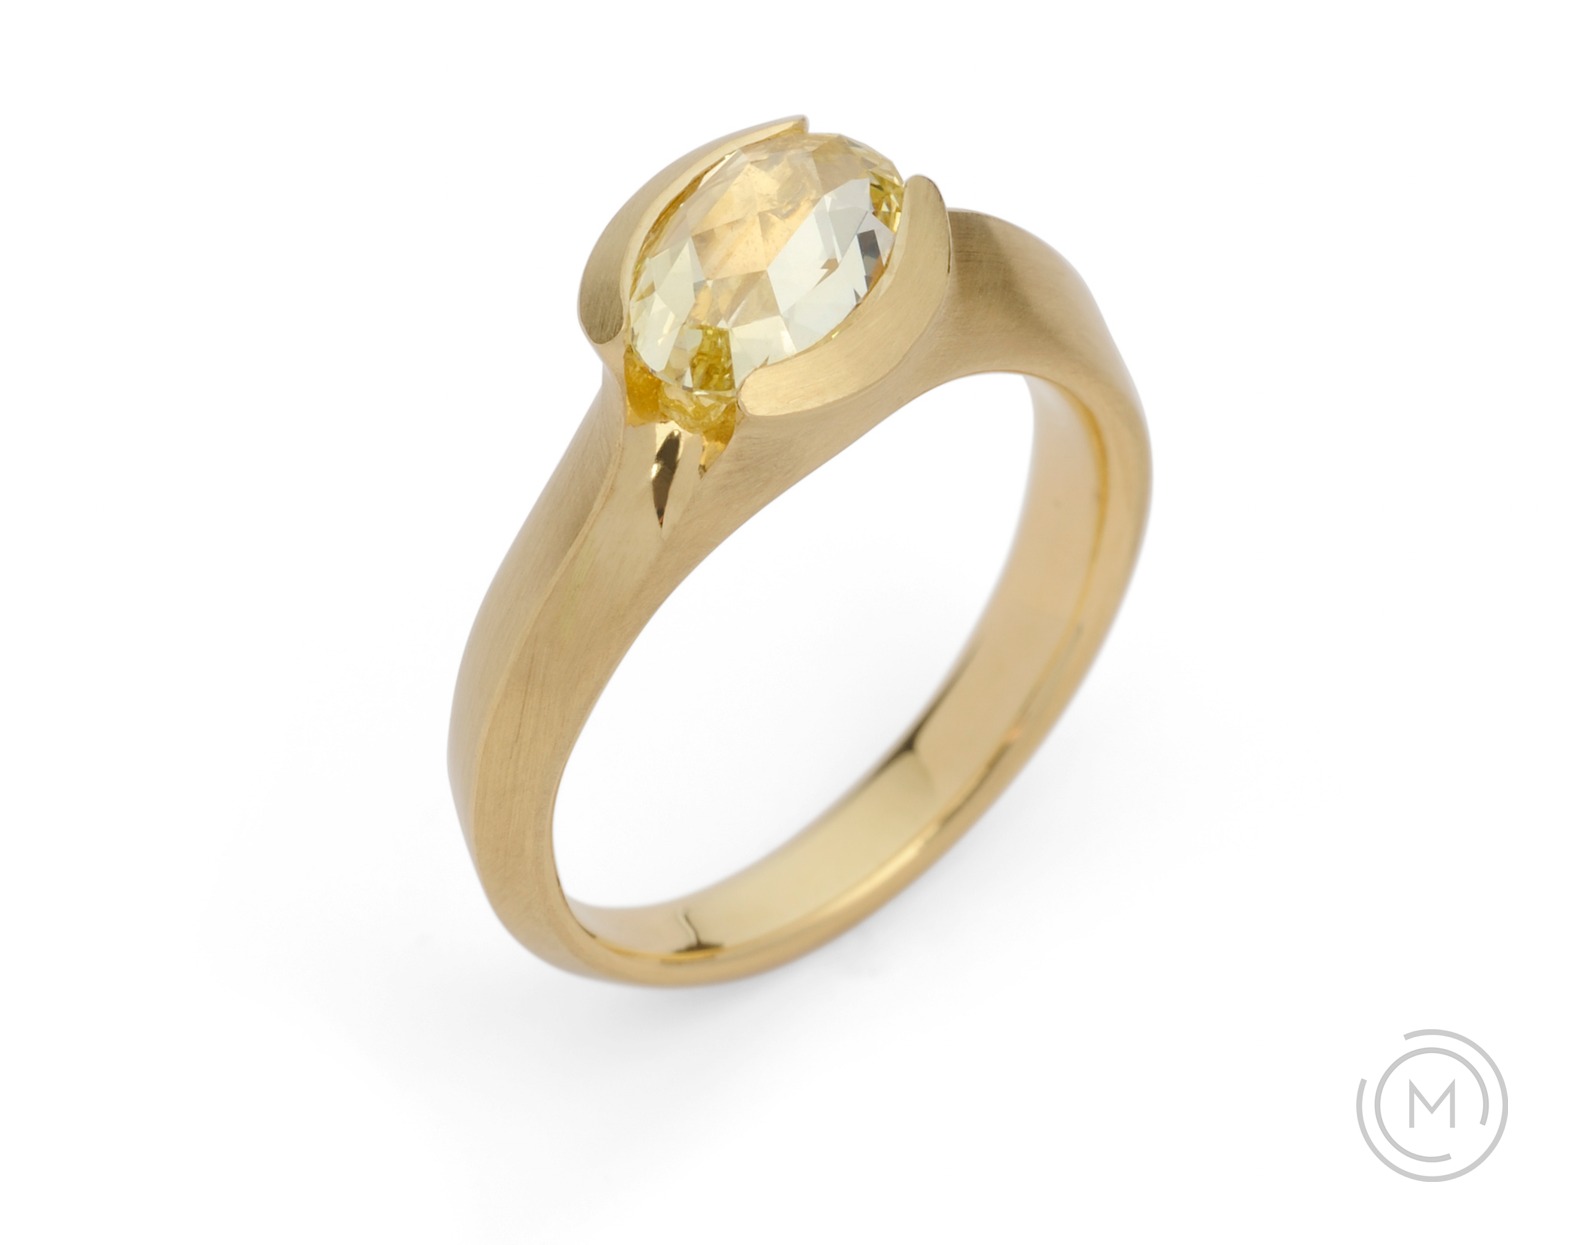 Unusual carved engagement ring with yellow rose-cut diamond